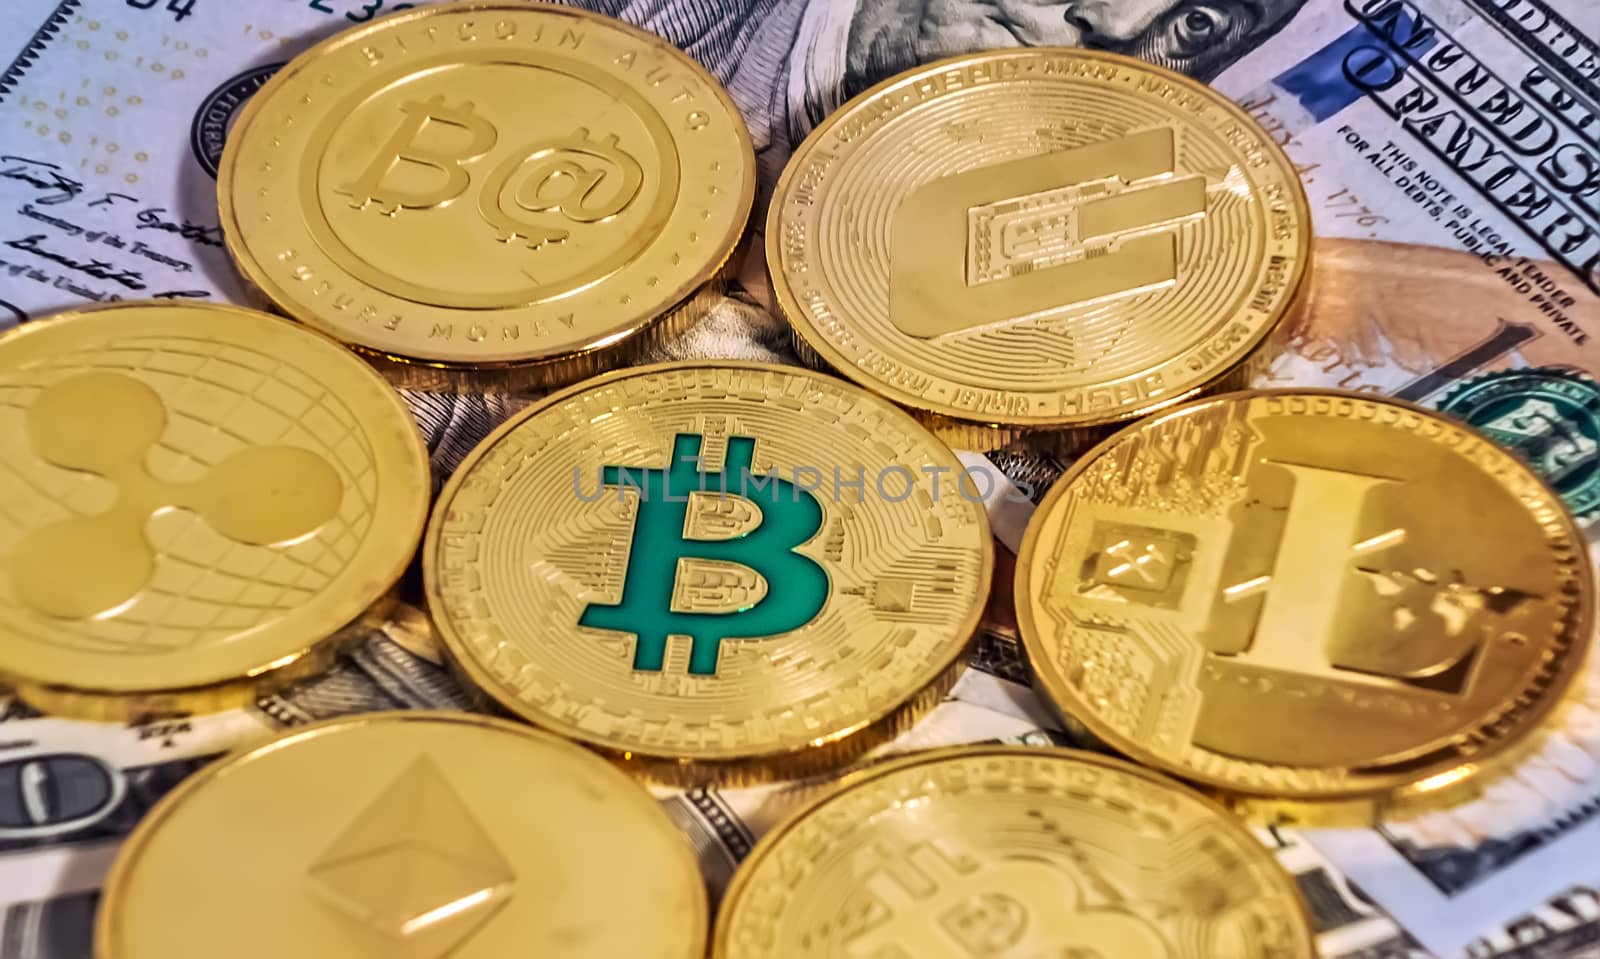 Gold Bitcoin Close up Collection of banknotes. Crypto currency money exchange for trade. Physical Coin Cryptocurrency BTC money Crypto Investing luxury backround.